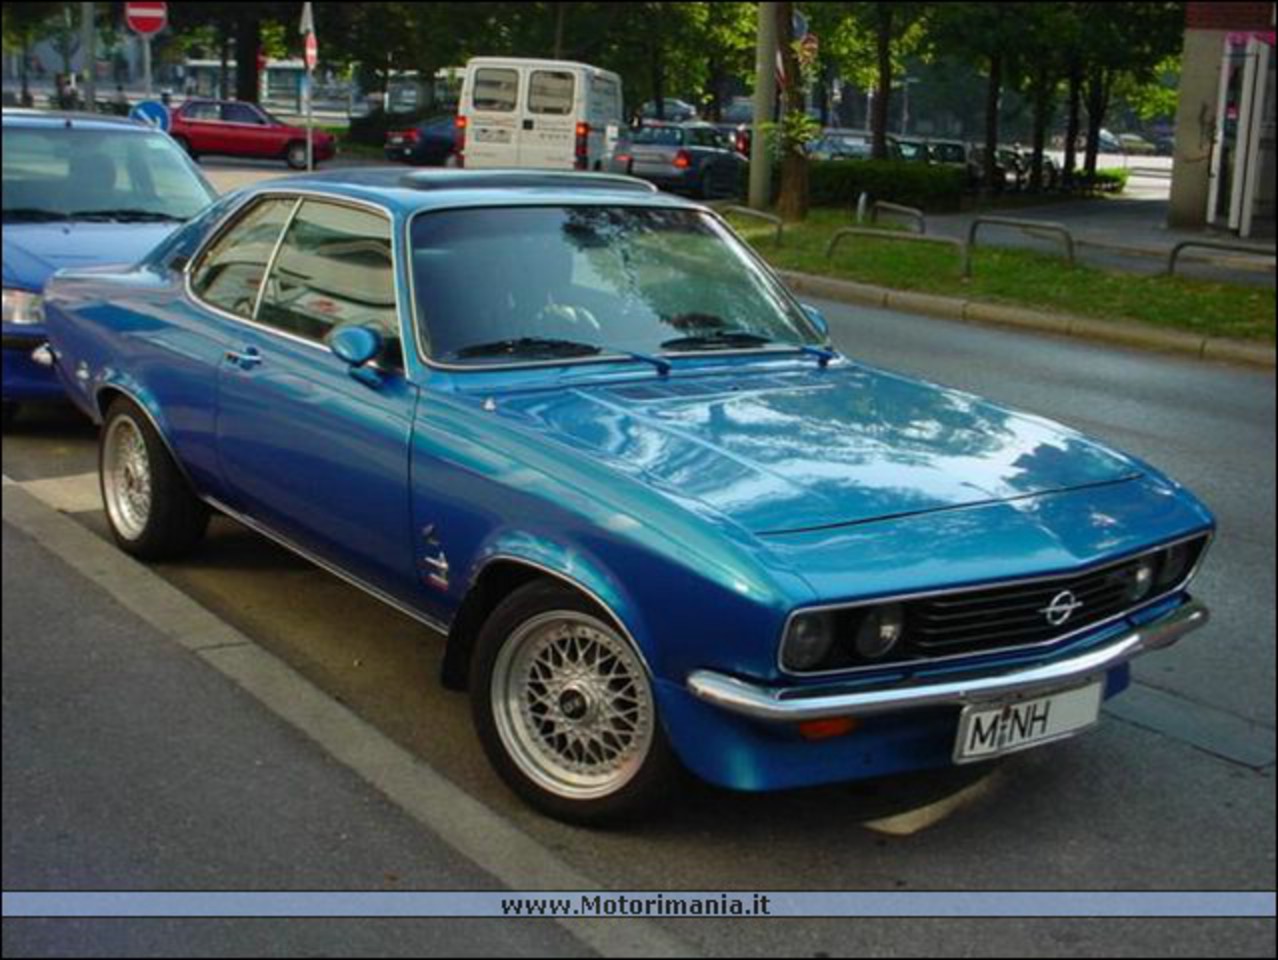 Opel Manta - huge collection of cars, auto news and reviews, car vitals,